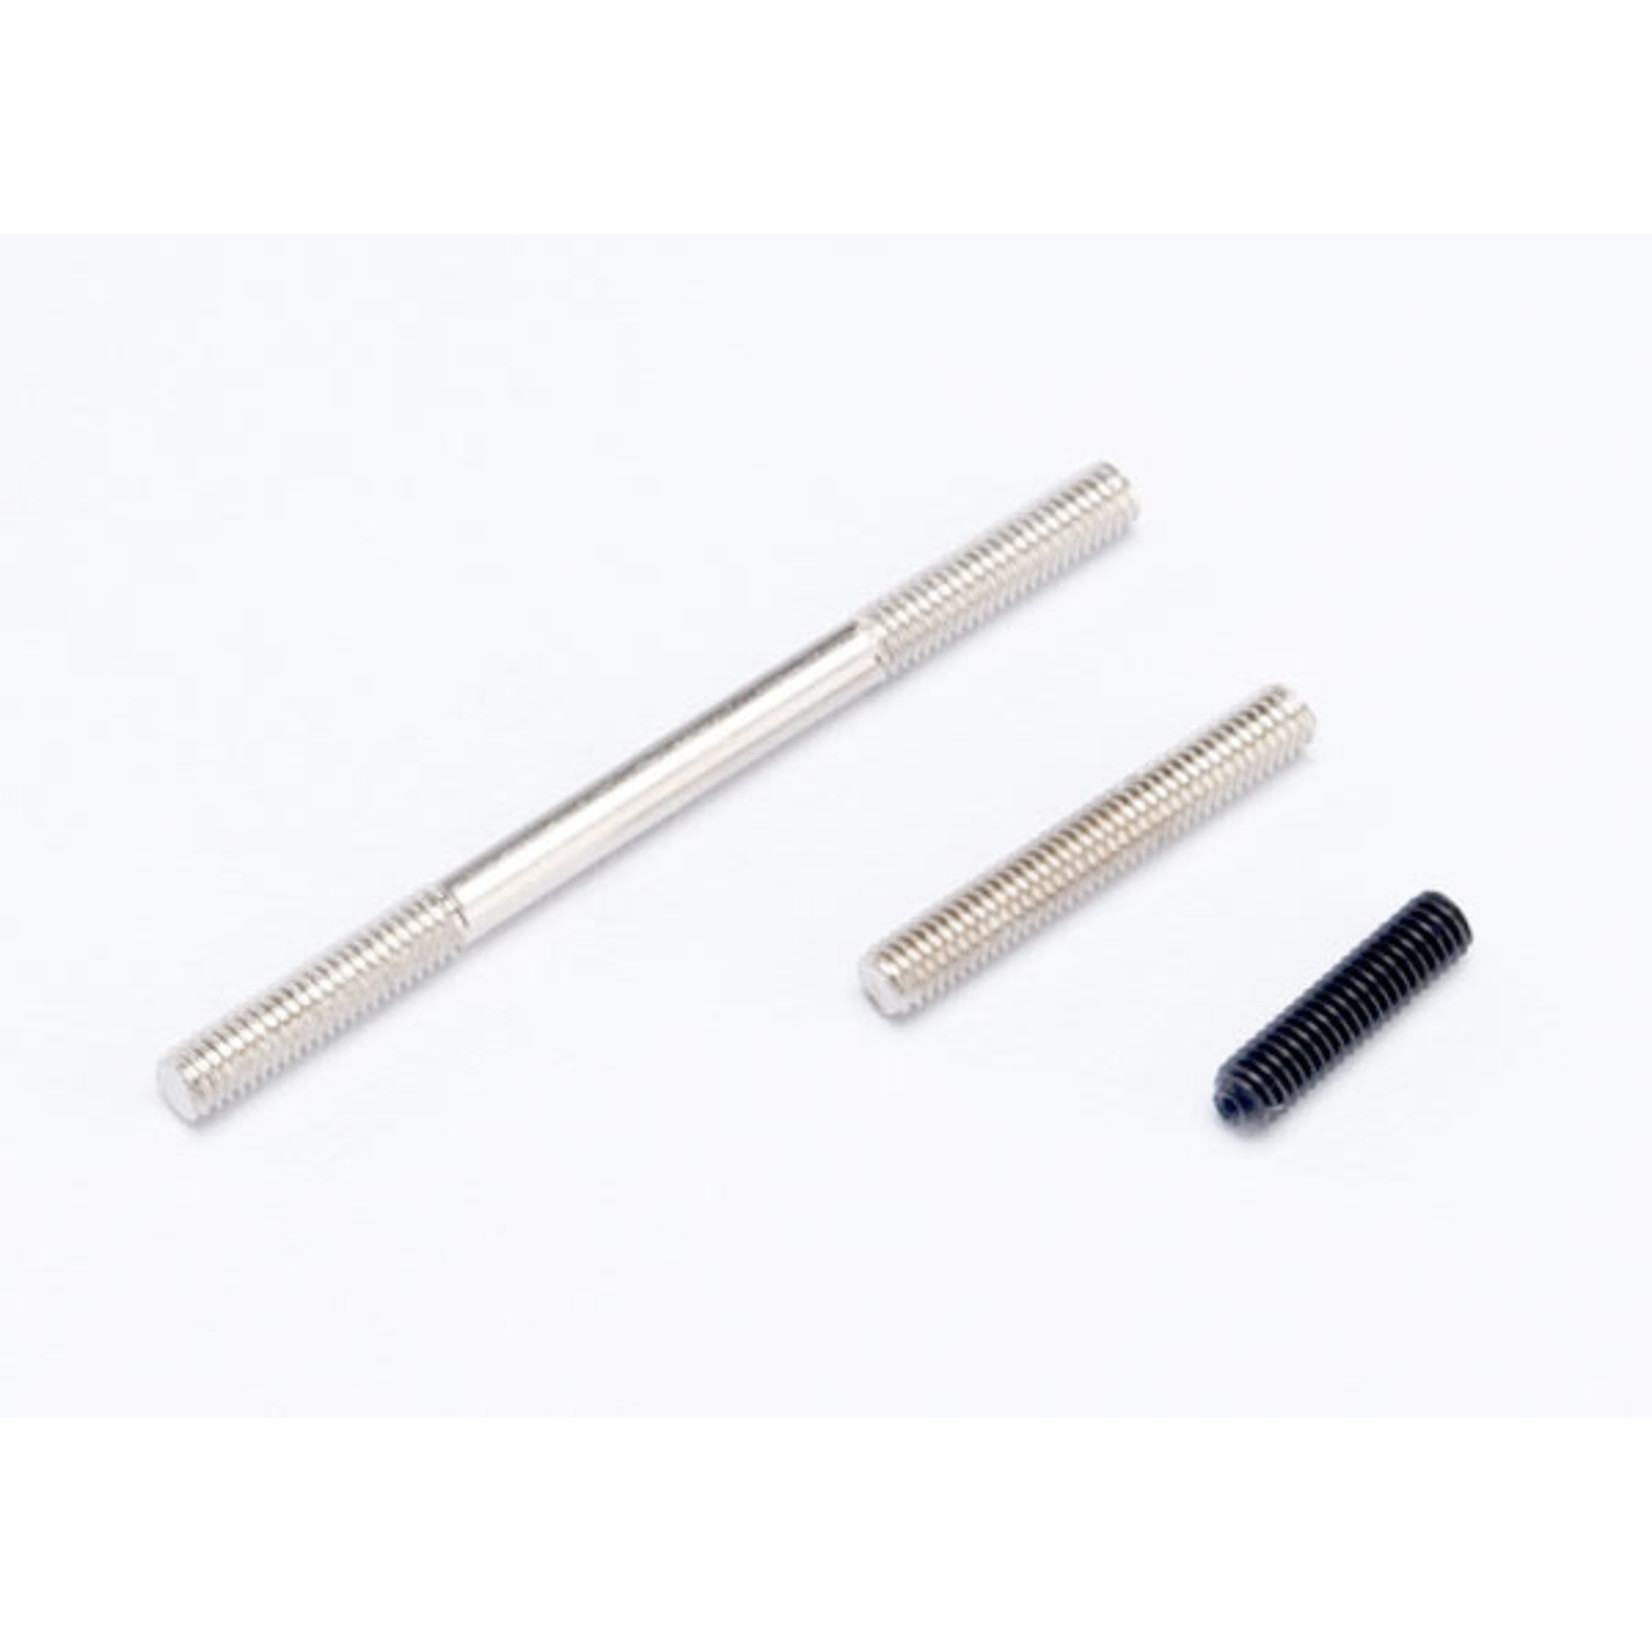 Traxxas 2537 - 3mm threaded rods: 1 each of 20mm,25mm&44mm